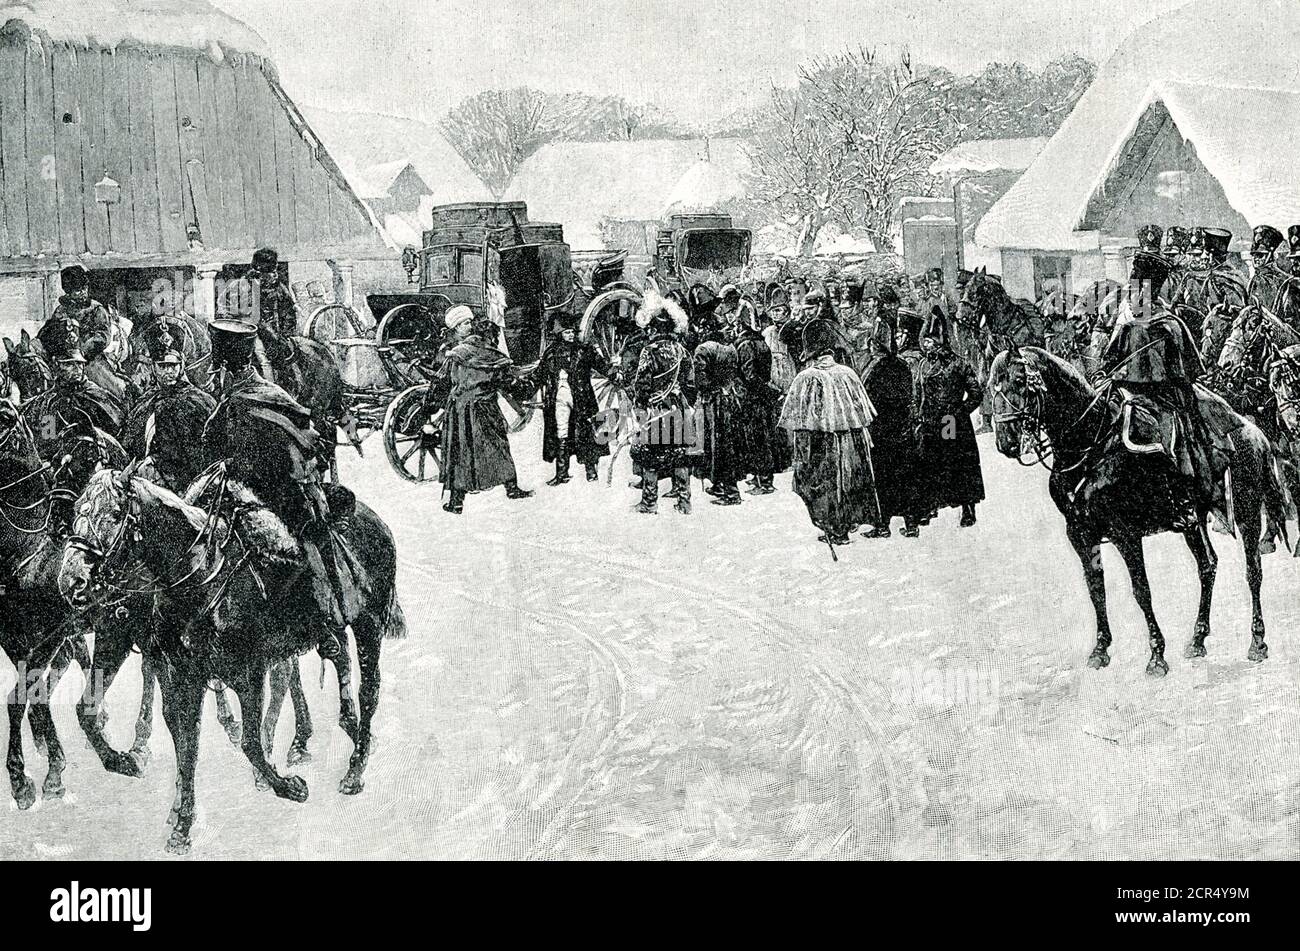 The caption for this 1906 illustration reads: ‘NAPOLEON ABANDONING HIS ARMY AT SMORGONL—The time came at last when Napoleon himself abandoned his perishing army to the fury of the Russian winter. In 1812, at Smorgon, he got into a carriage and, with a few of his generals, rode madly away from the hideous suffering and disaster which he could not check. His excuse was that he went to gather reinforcements, but he left his soldiers to despair.’ Napoleon Bonaparte (1769–1821) was a French military and political leader who became the emperor of France. His invasion of Russia in 1812 led ultimately Stock Photo